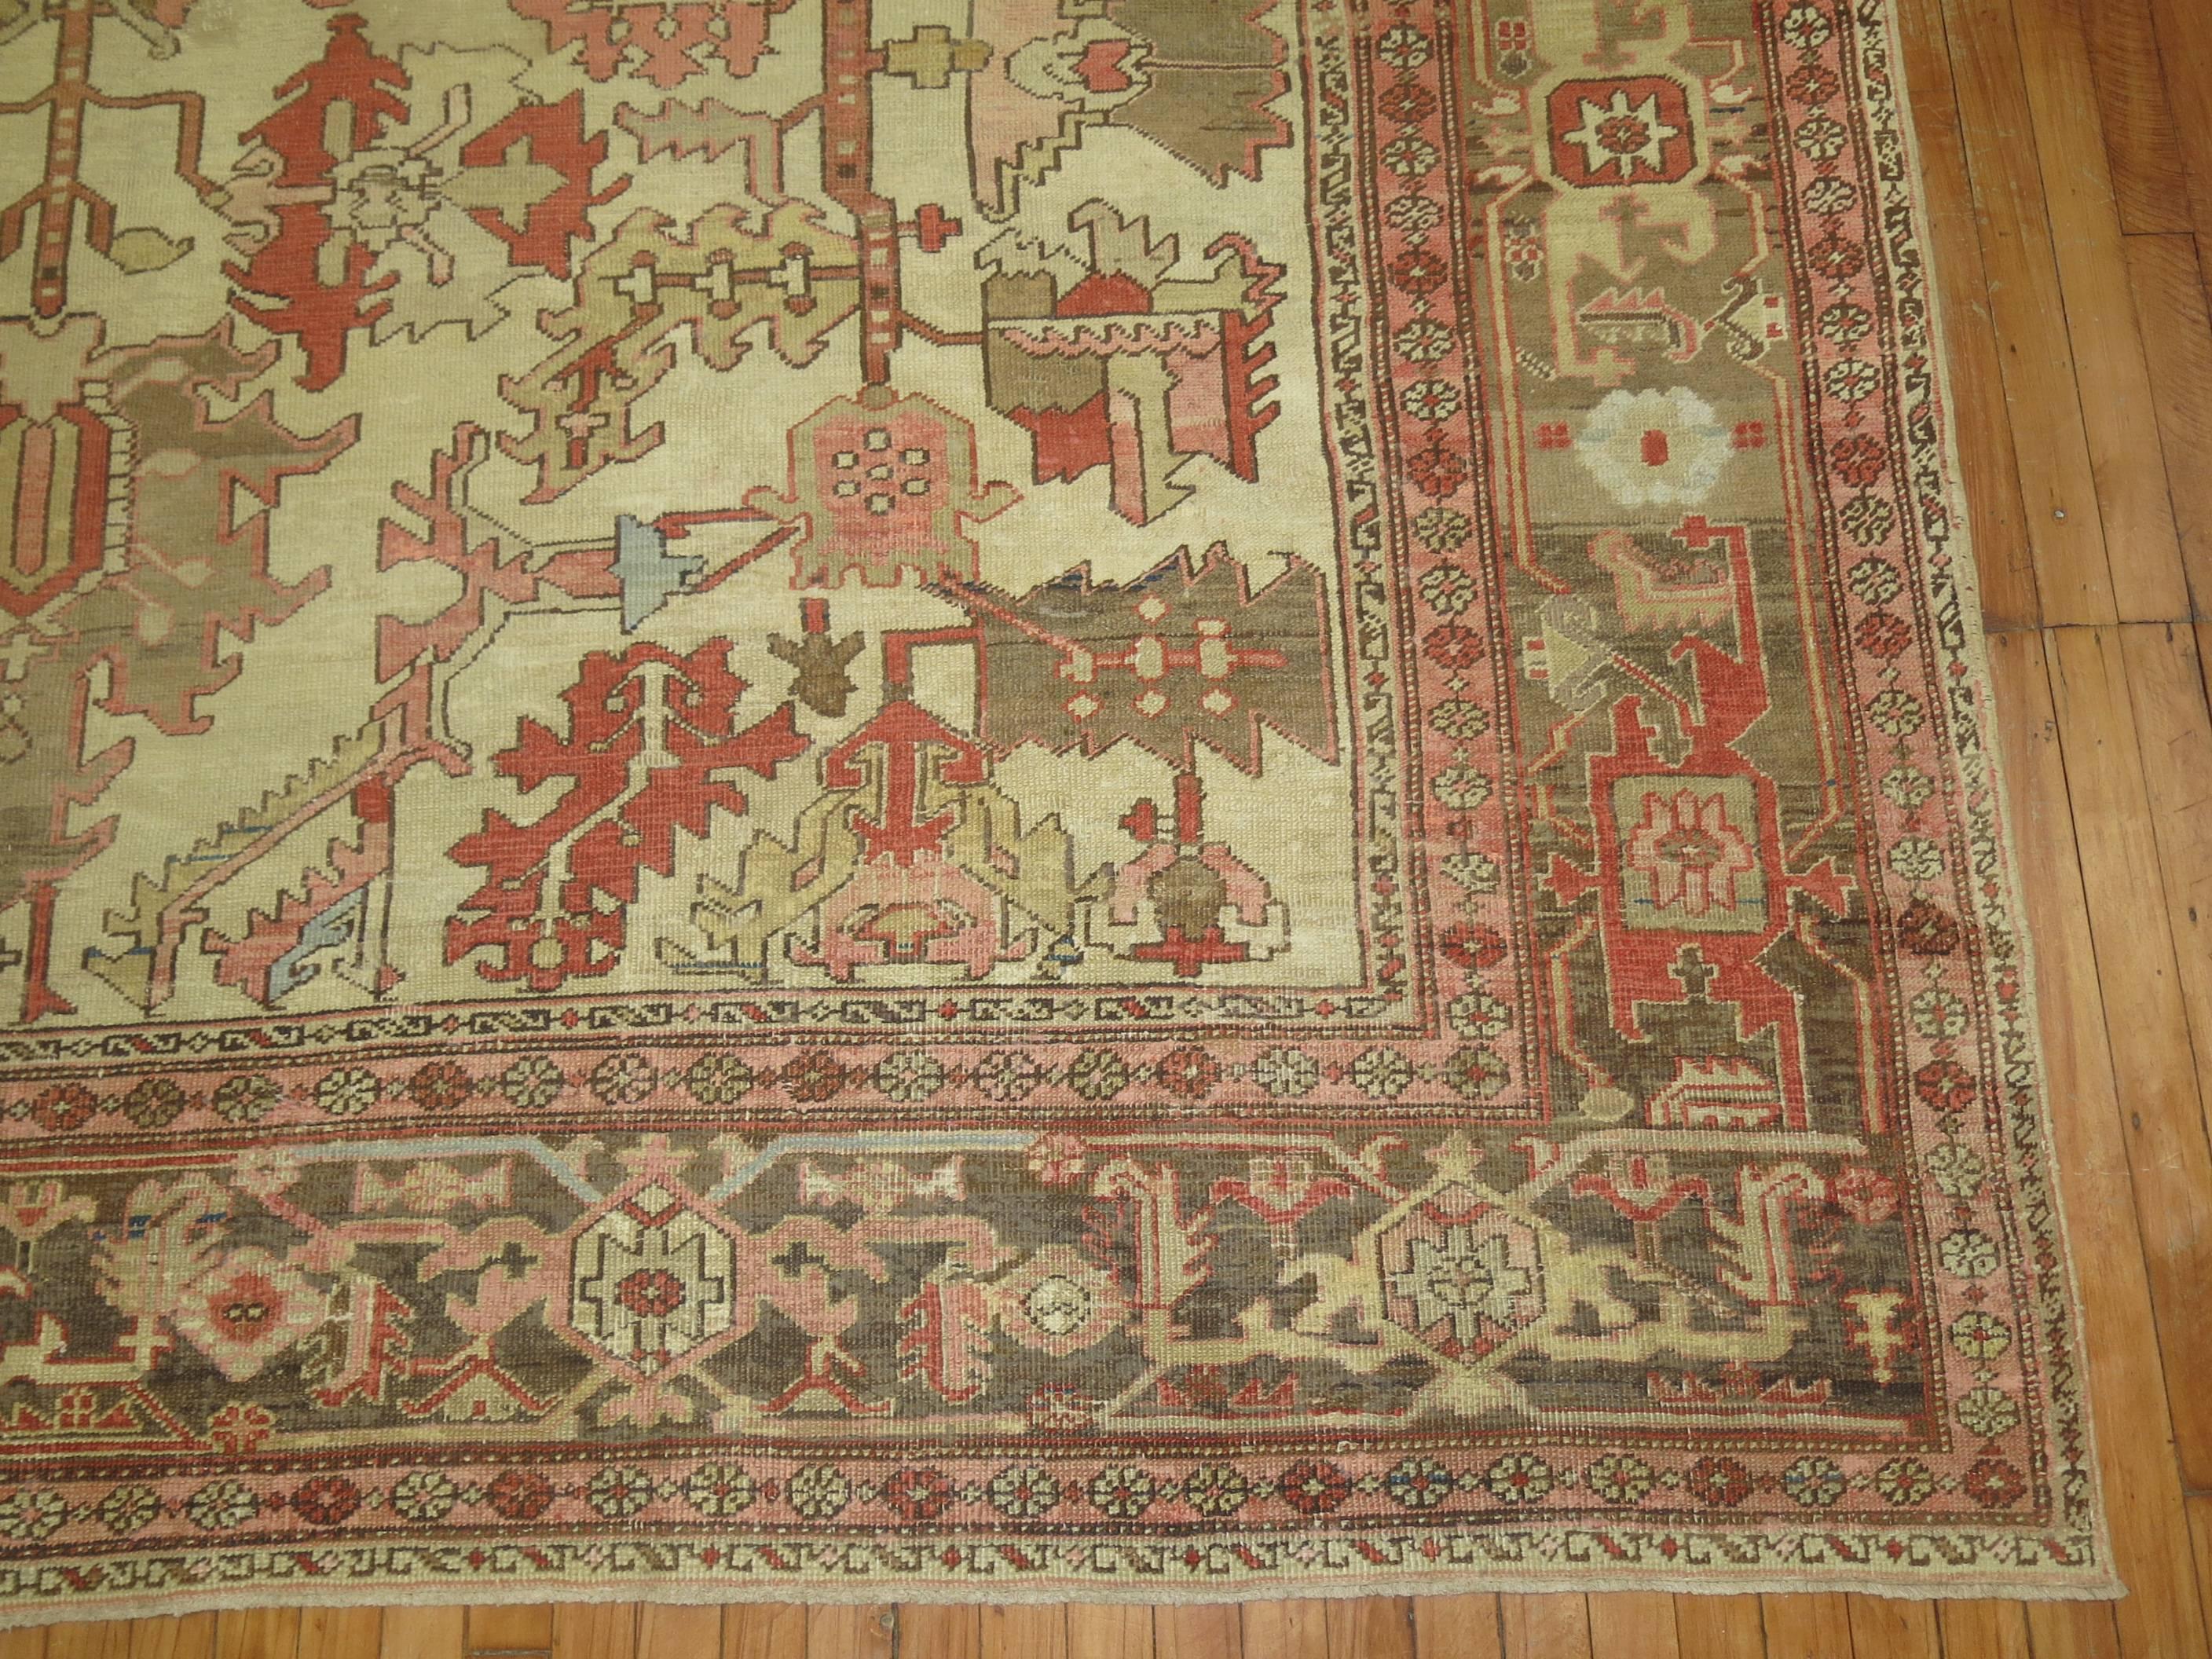 Wonderful antique Persian Heriz Serapi rug . Ivory field , soft brown borders with predominant accents in blue grey & terracotta.

The finest antique Persian Serapis are geometric in design with open spacious patterns in subtle colors. The great